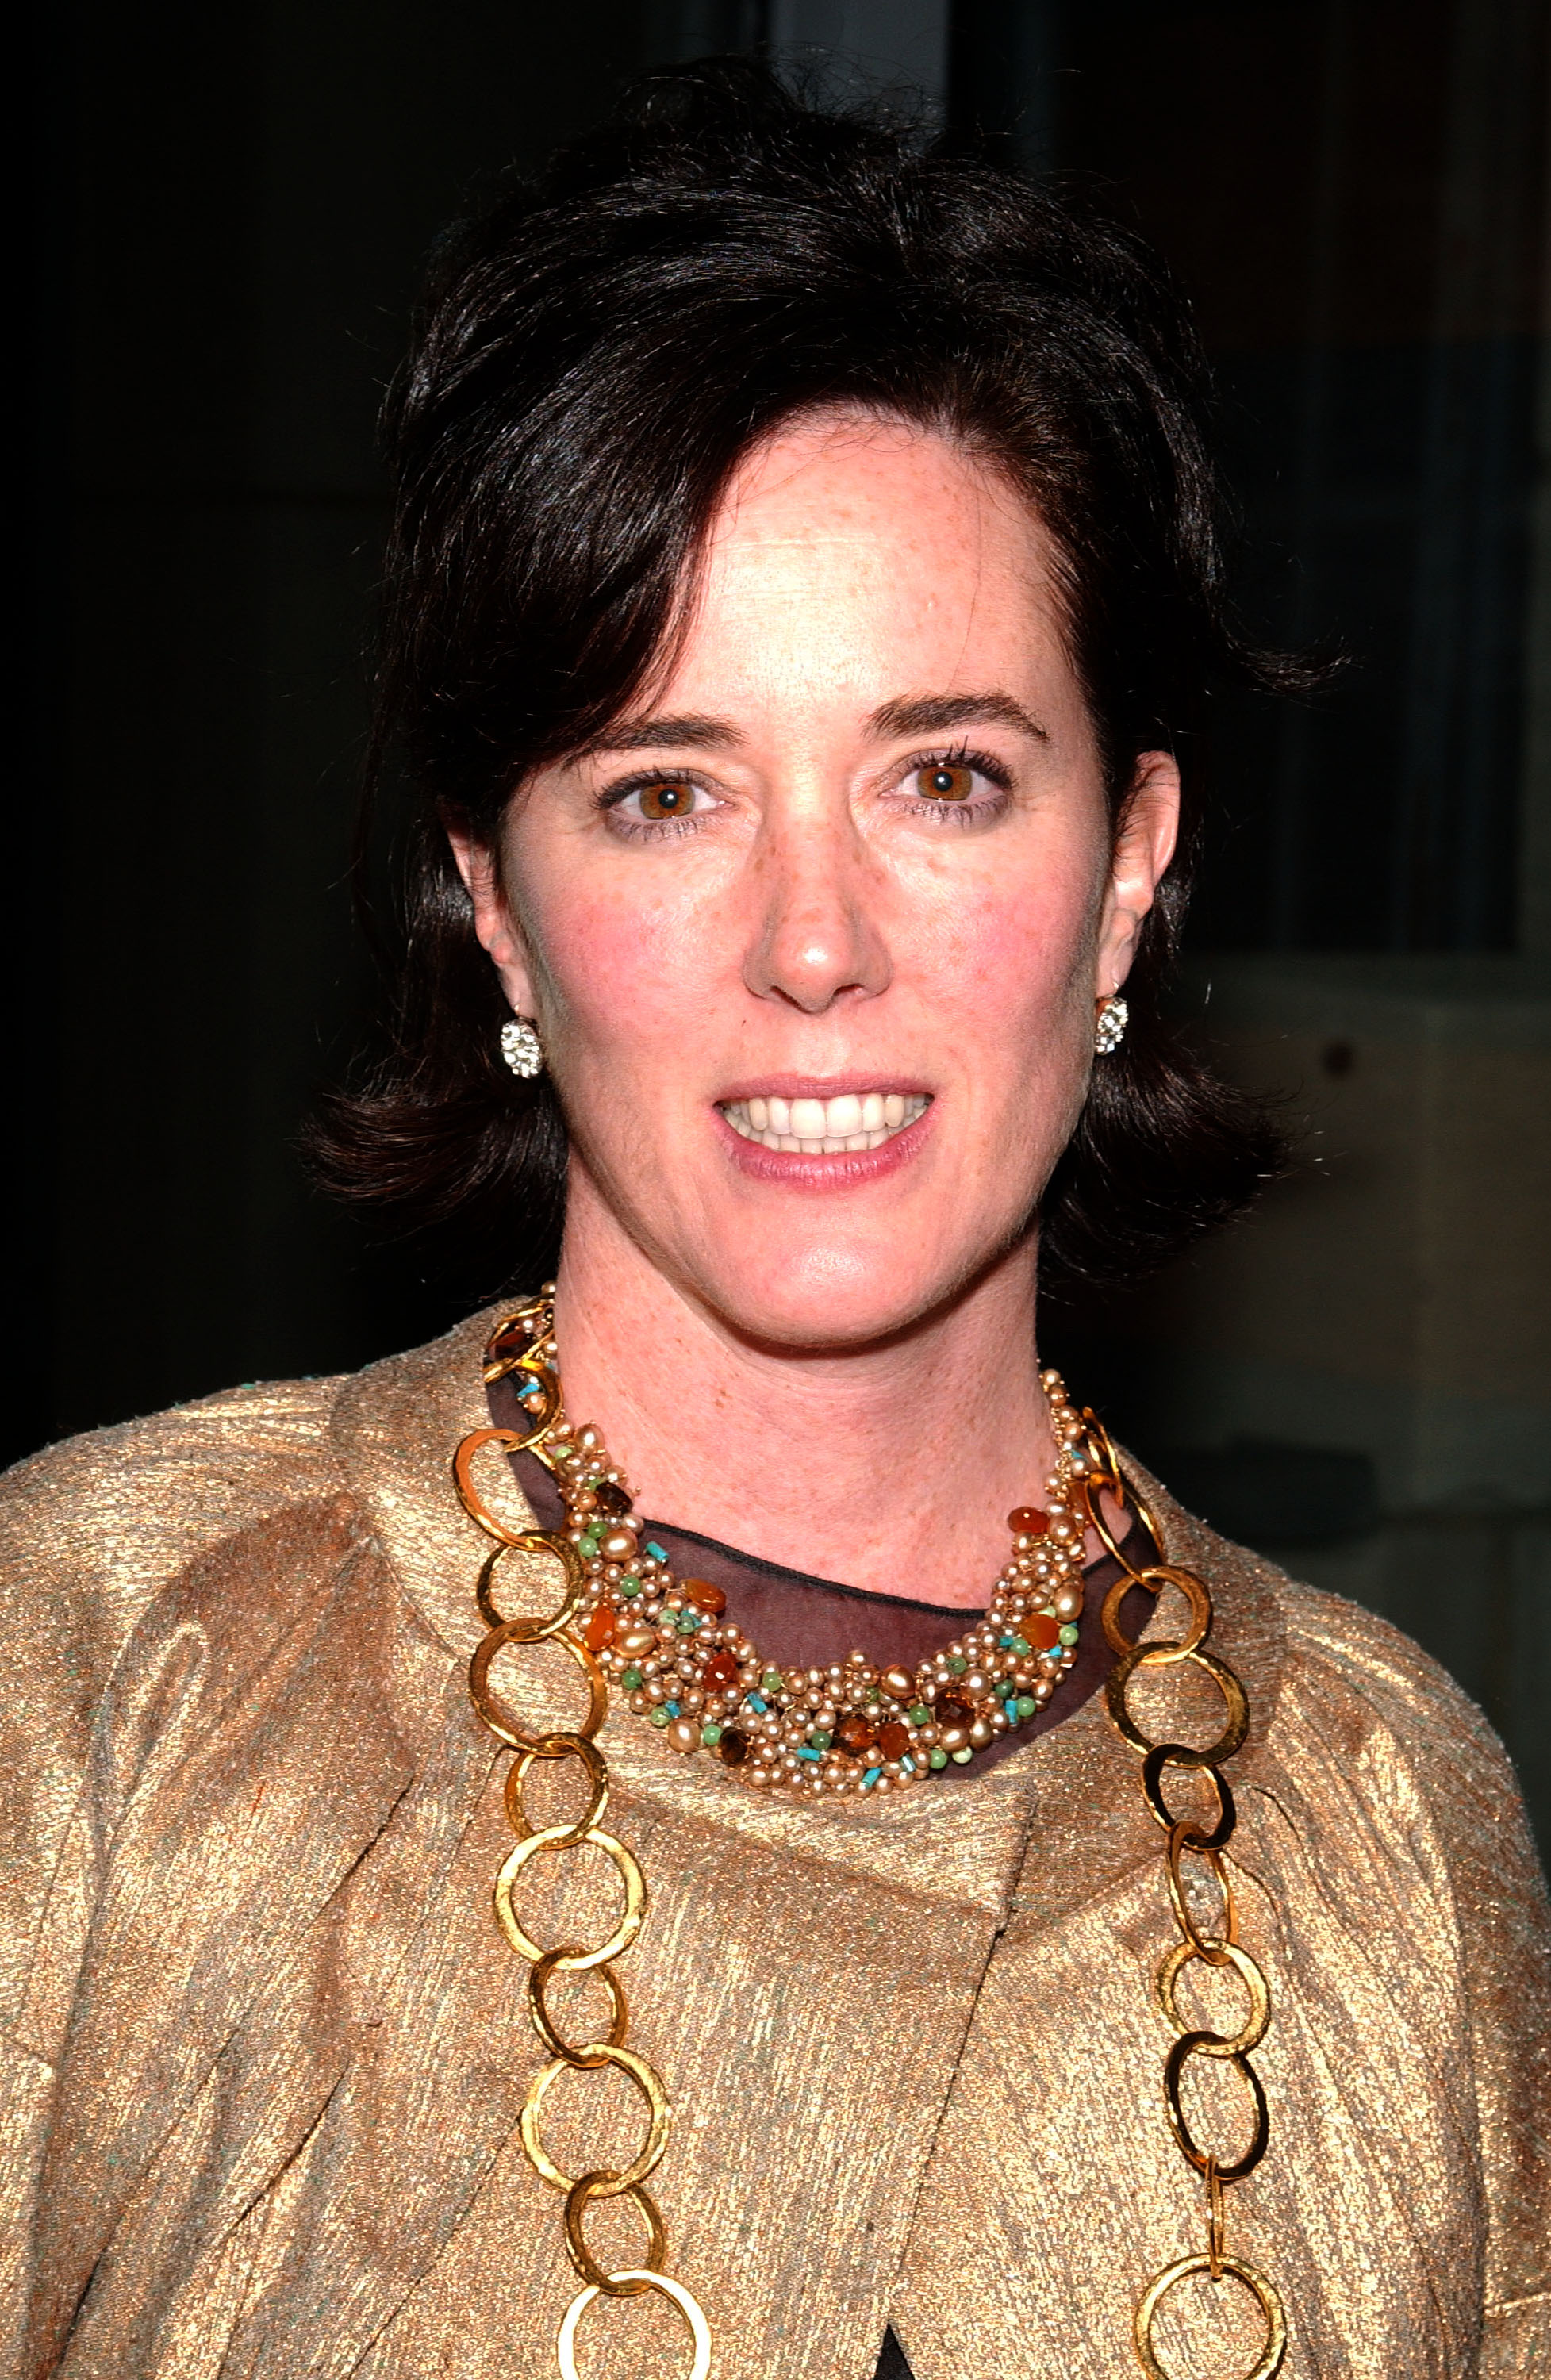 Reta Saffo, Kate Spade's Sister: 5 Facts You Need to Know